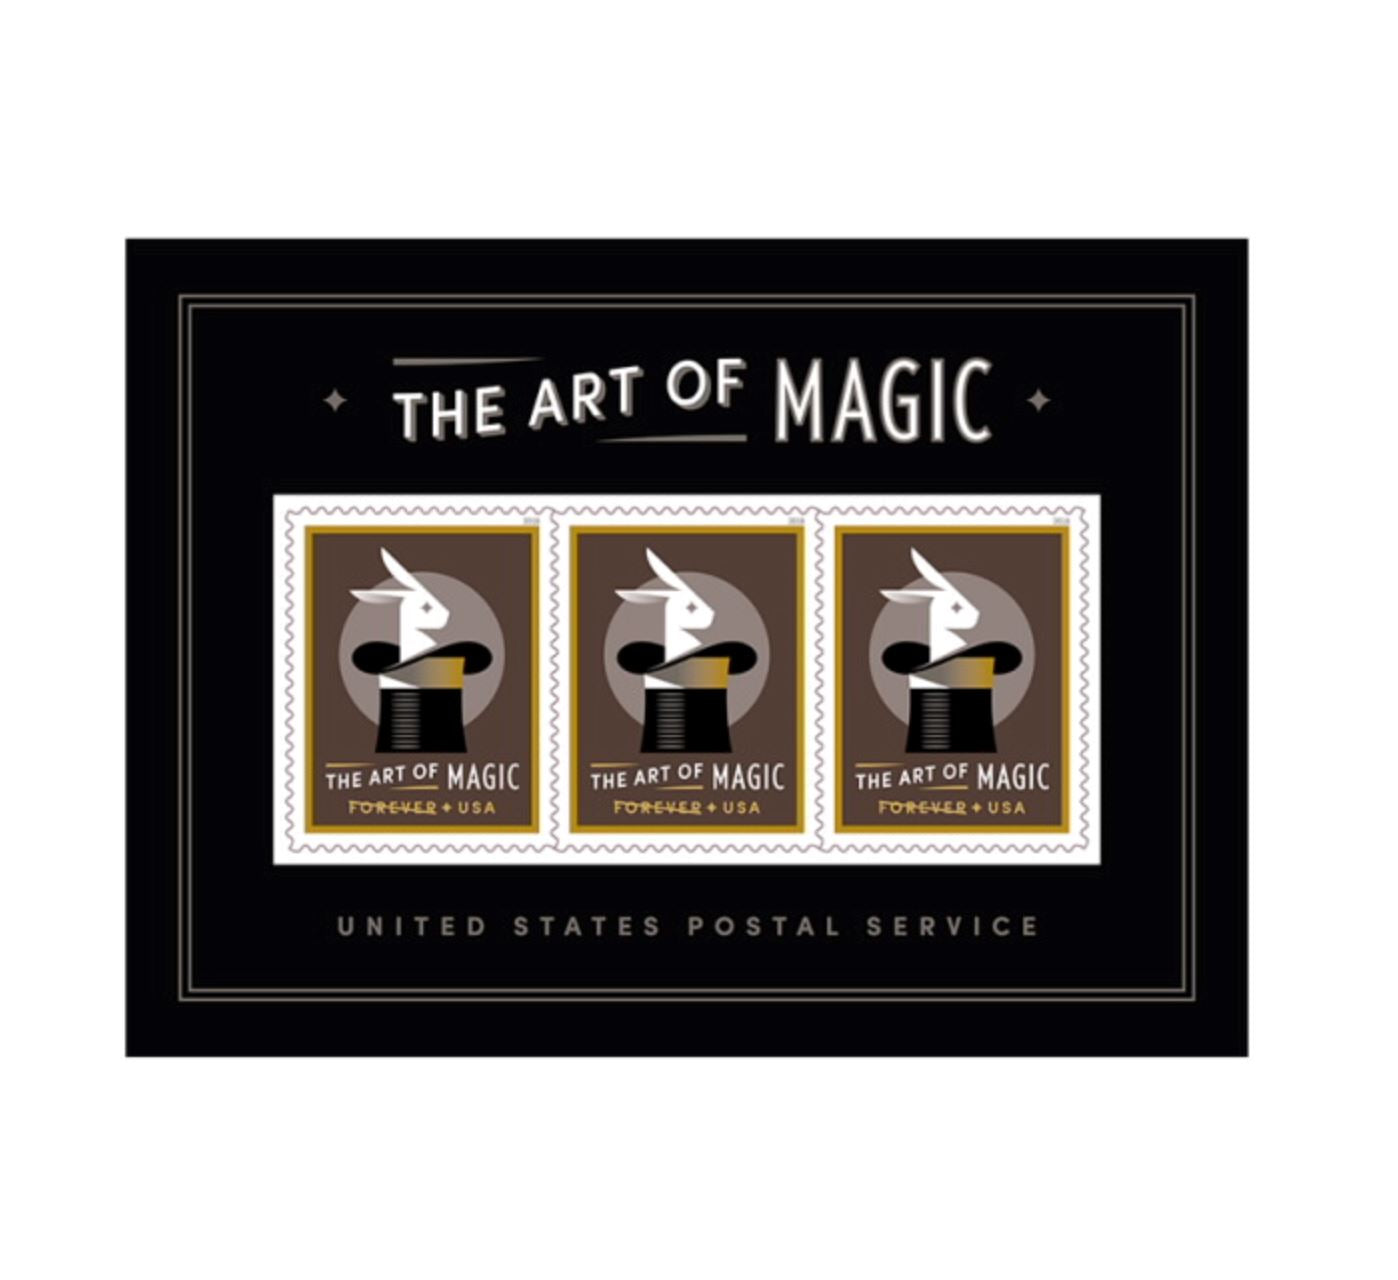 3 Art of Magic US Forever Stamps - Tiny and Snail